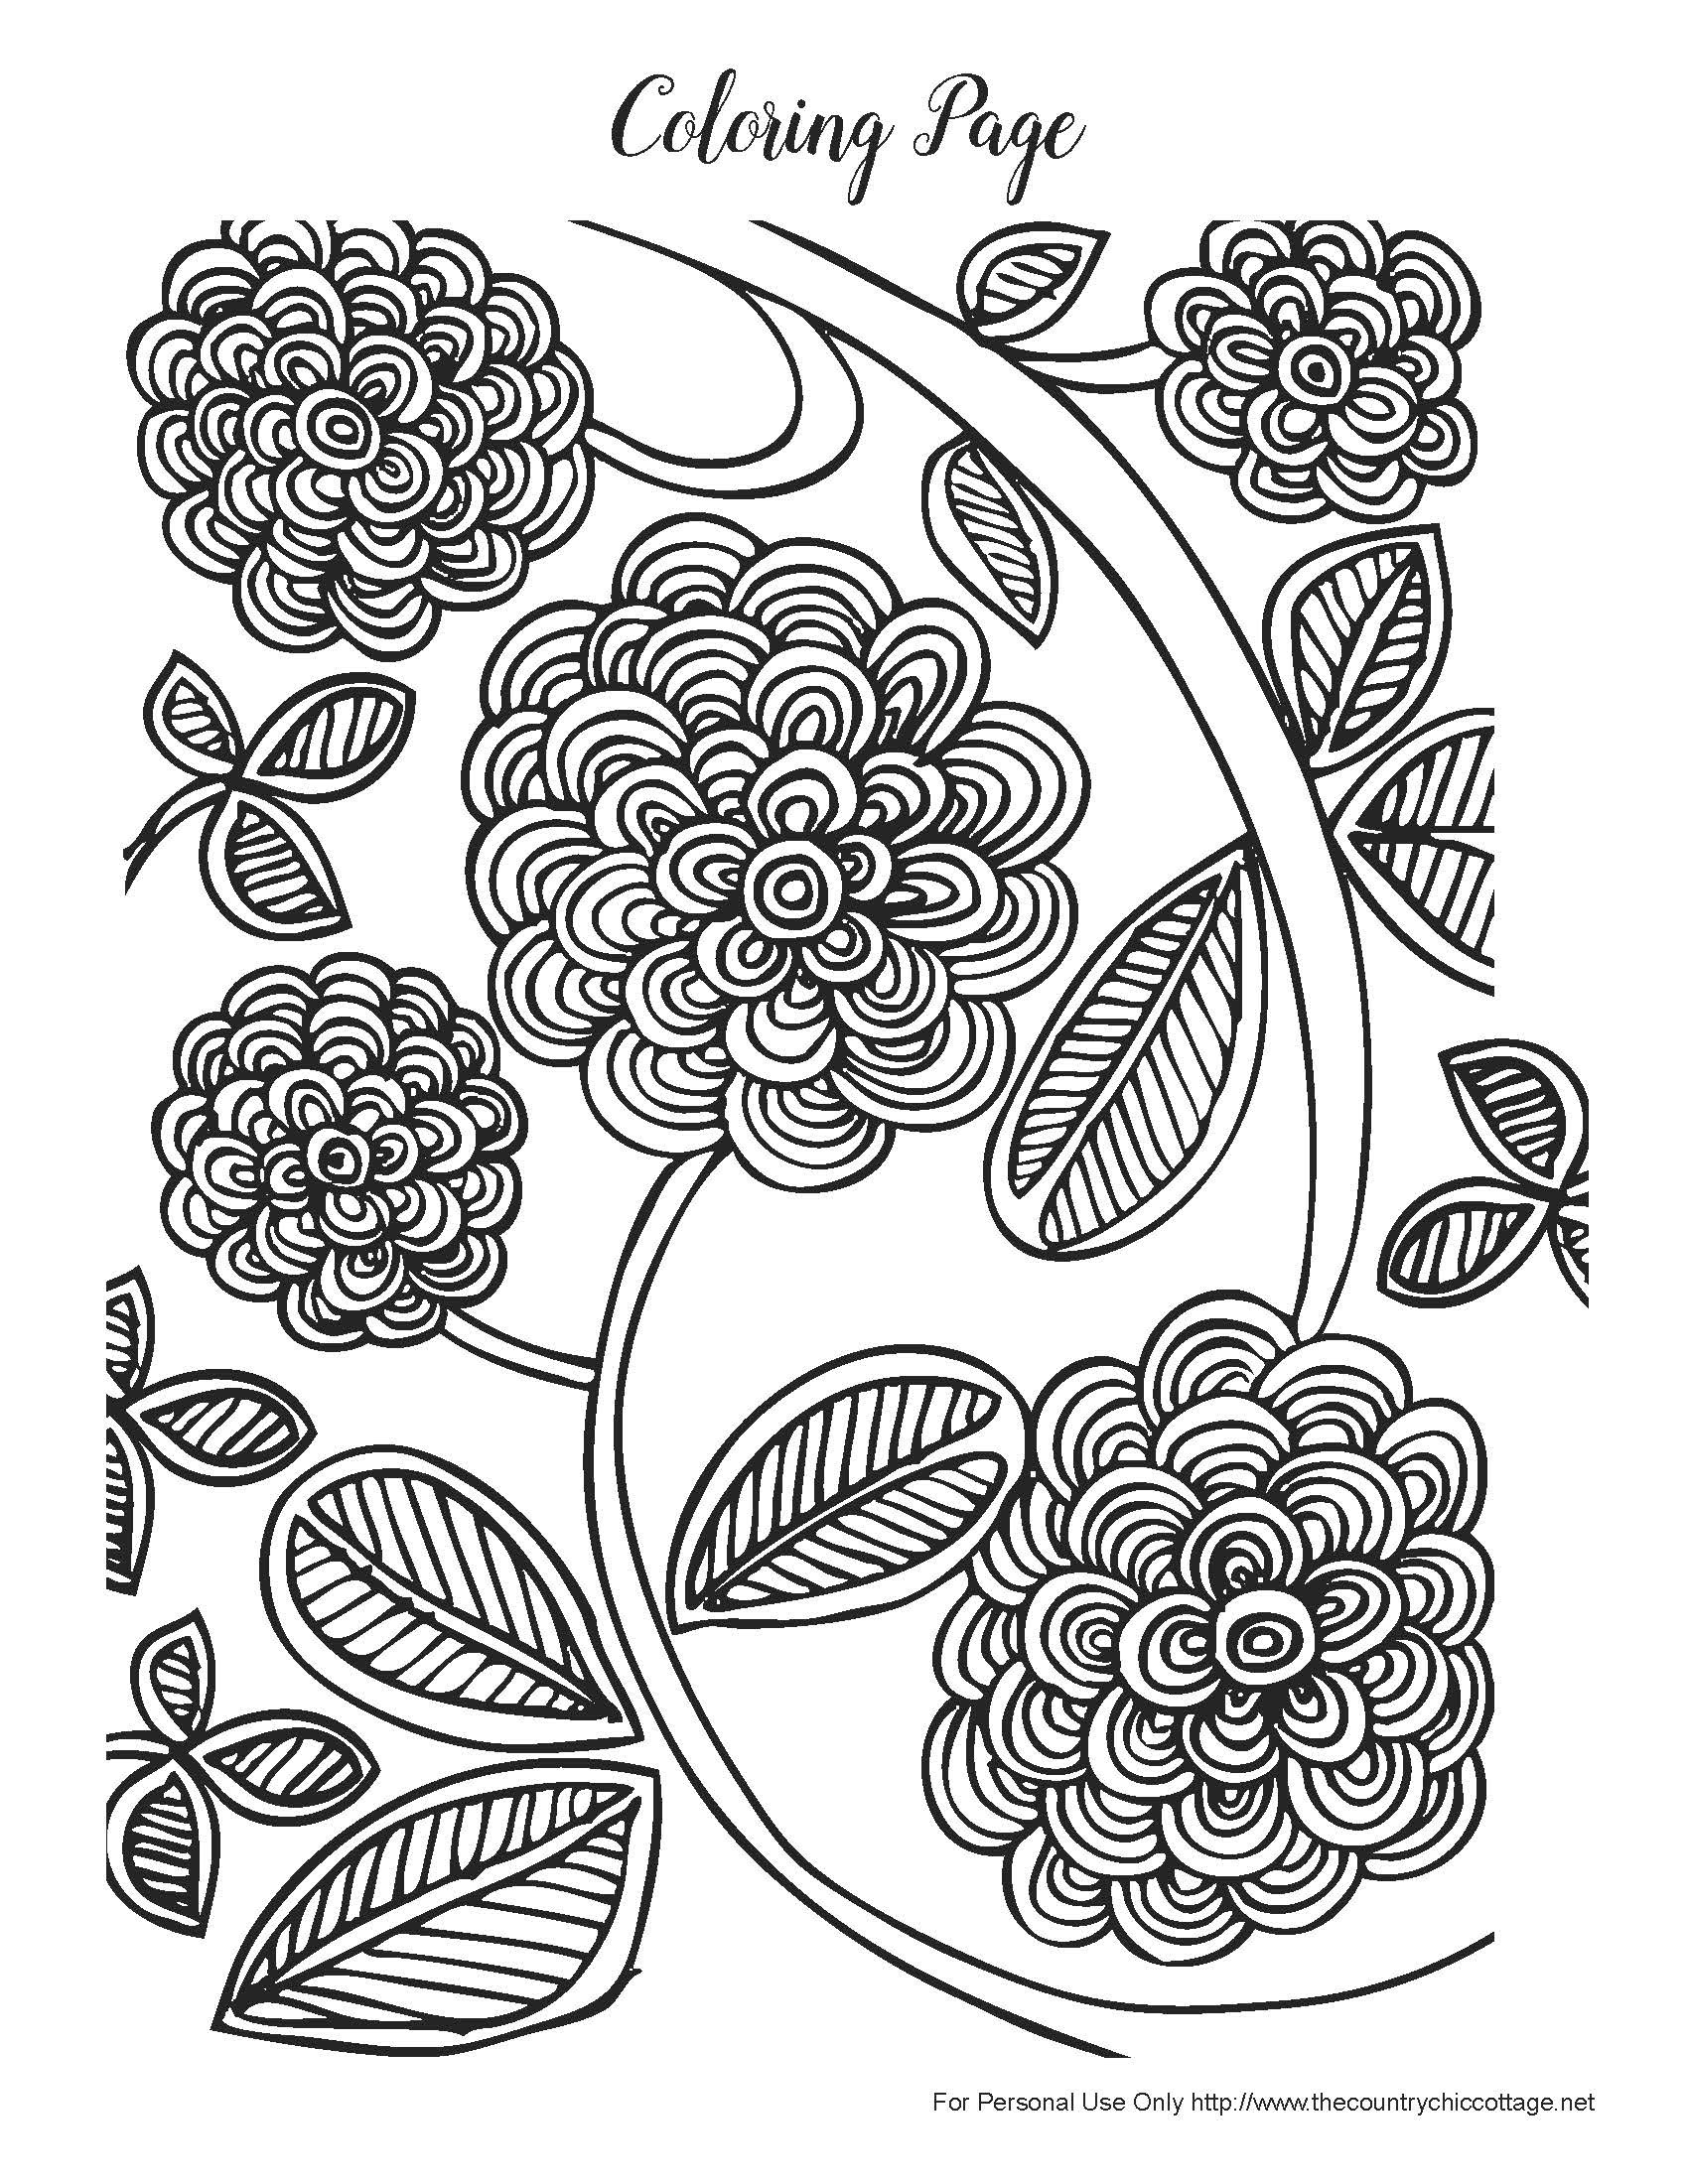 Free Printable Spring Coloring Pages
 Free Spring Coloring Pages for Adults The Country Chic